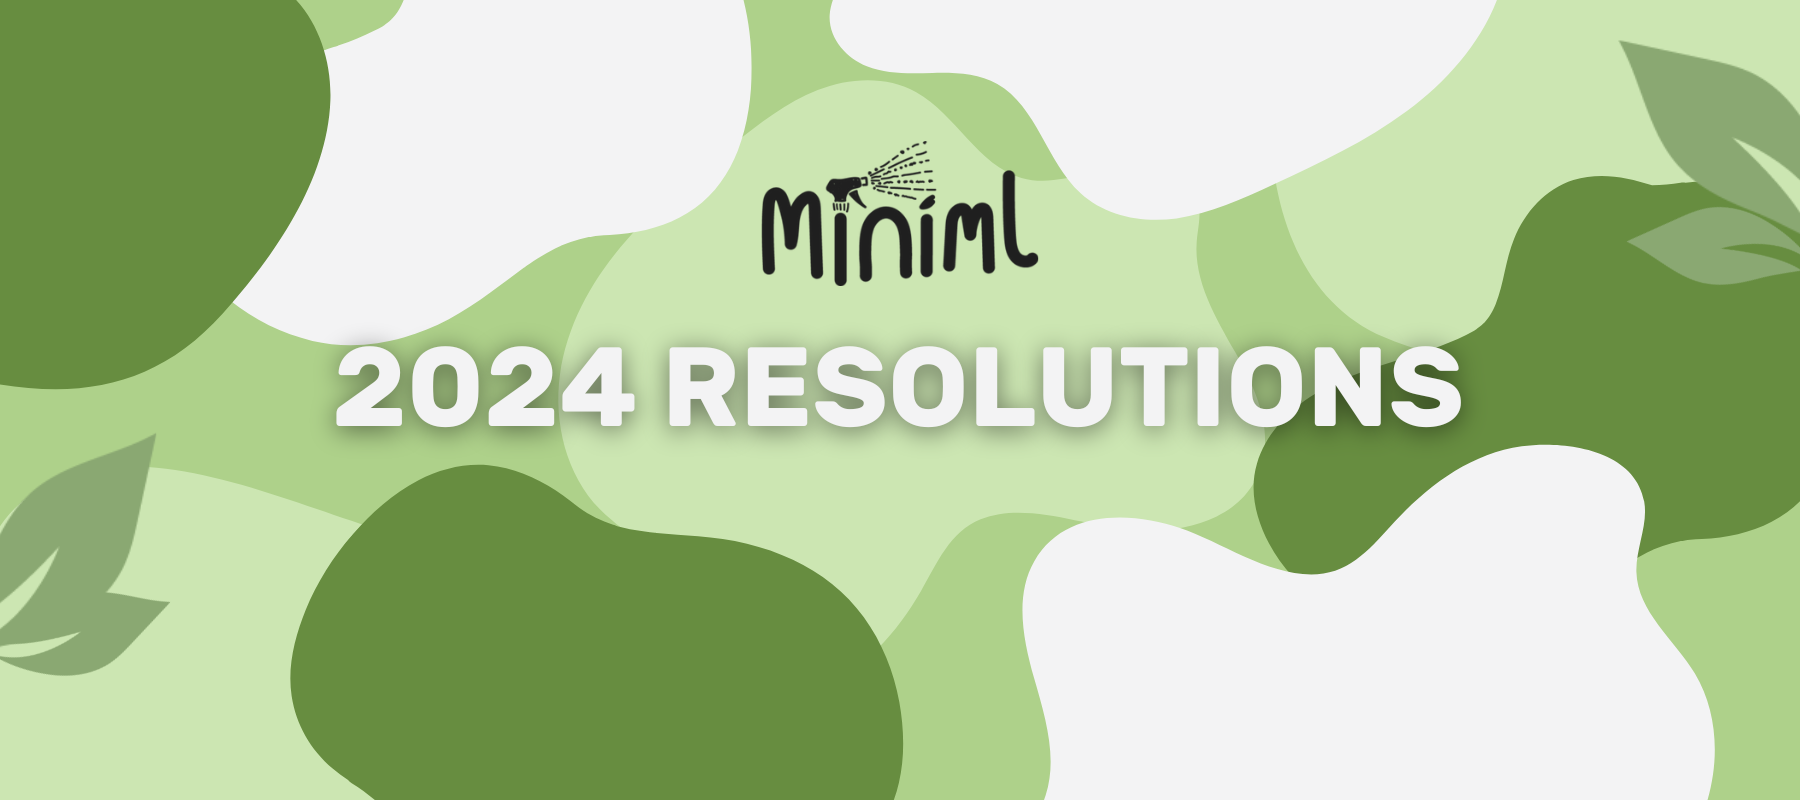 Veganuary and Sustainable Resolutions For a Greener 2024 Miniml